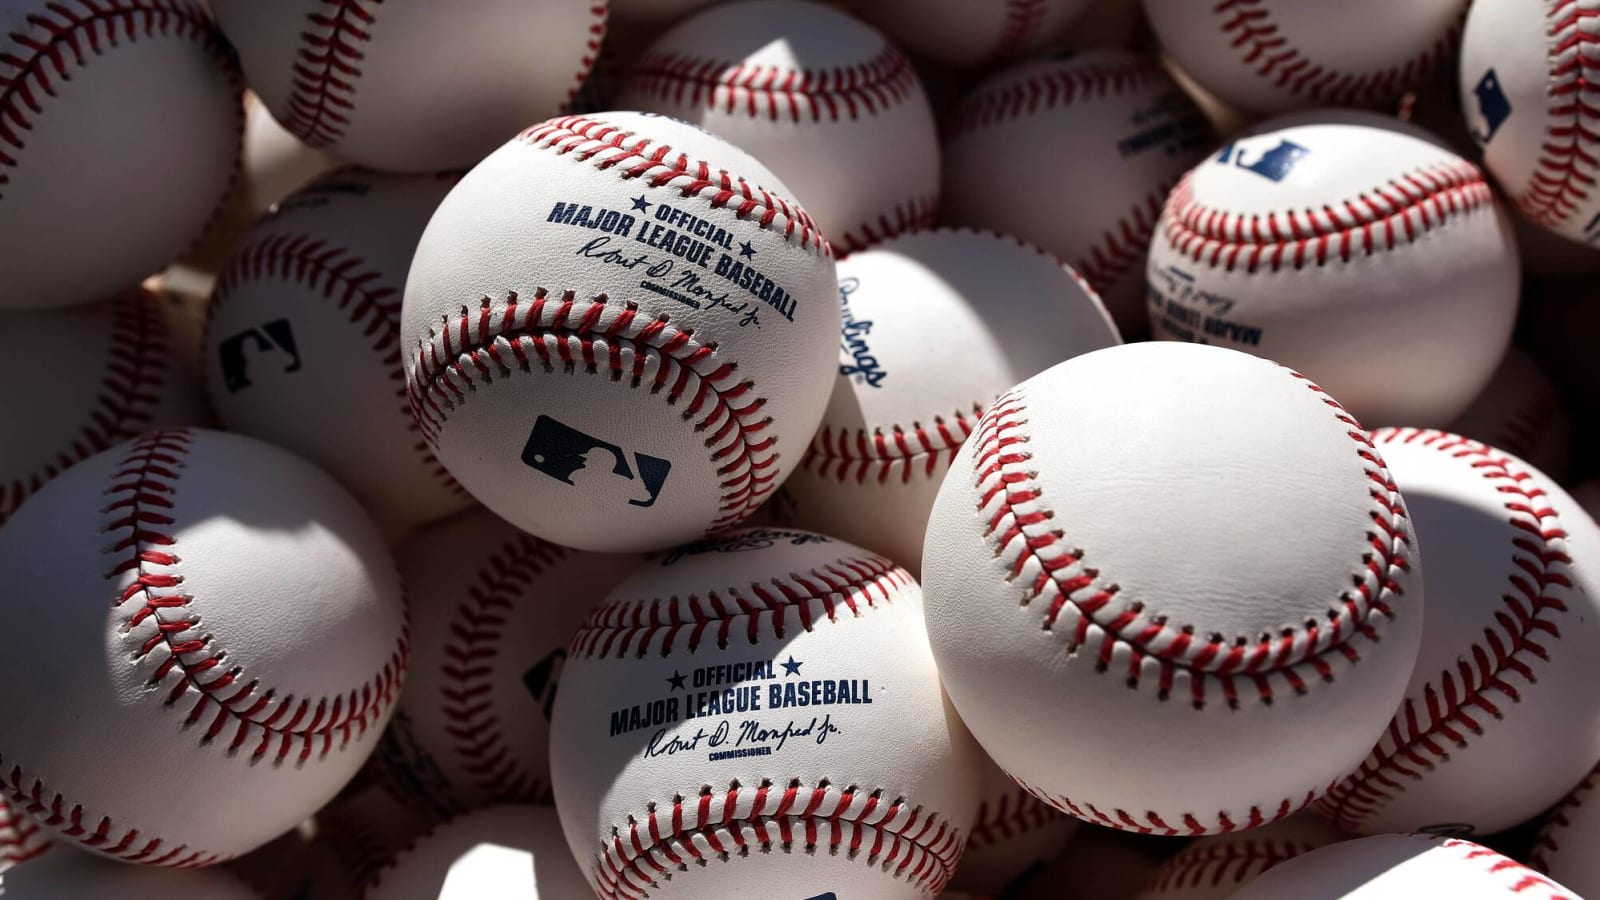 MLB will reportedly stream games for free in some markets Yardbarker